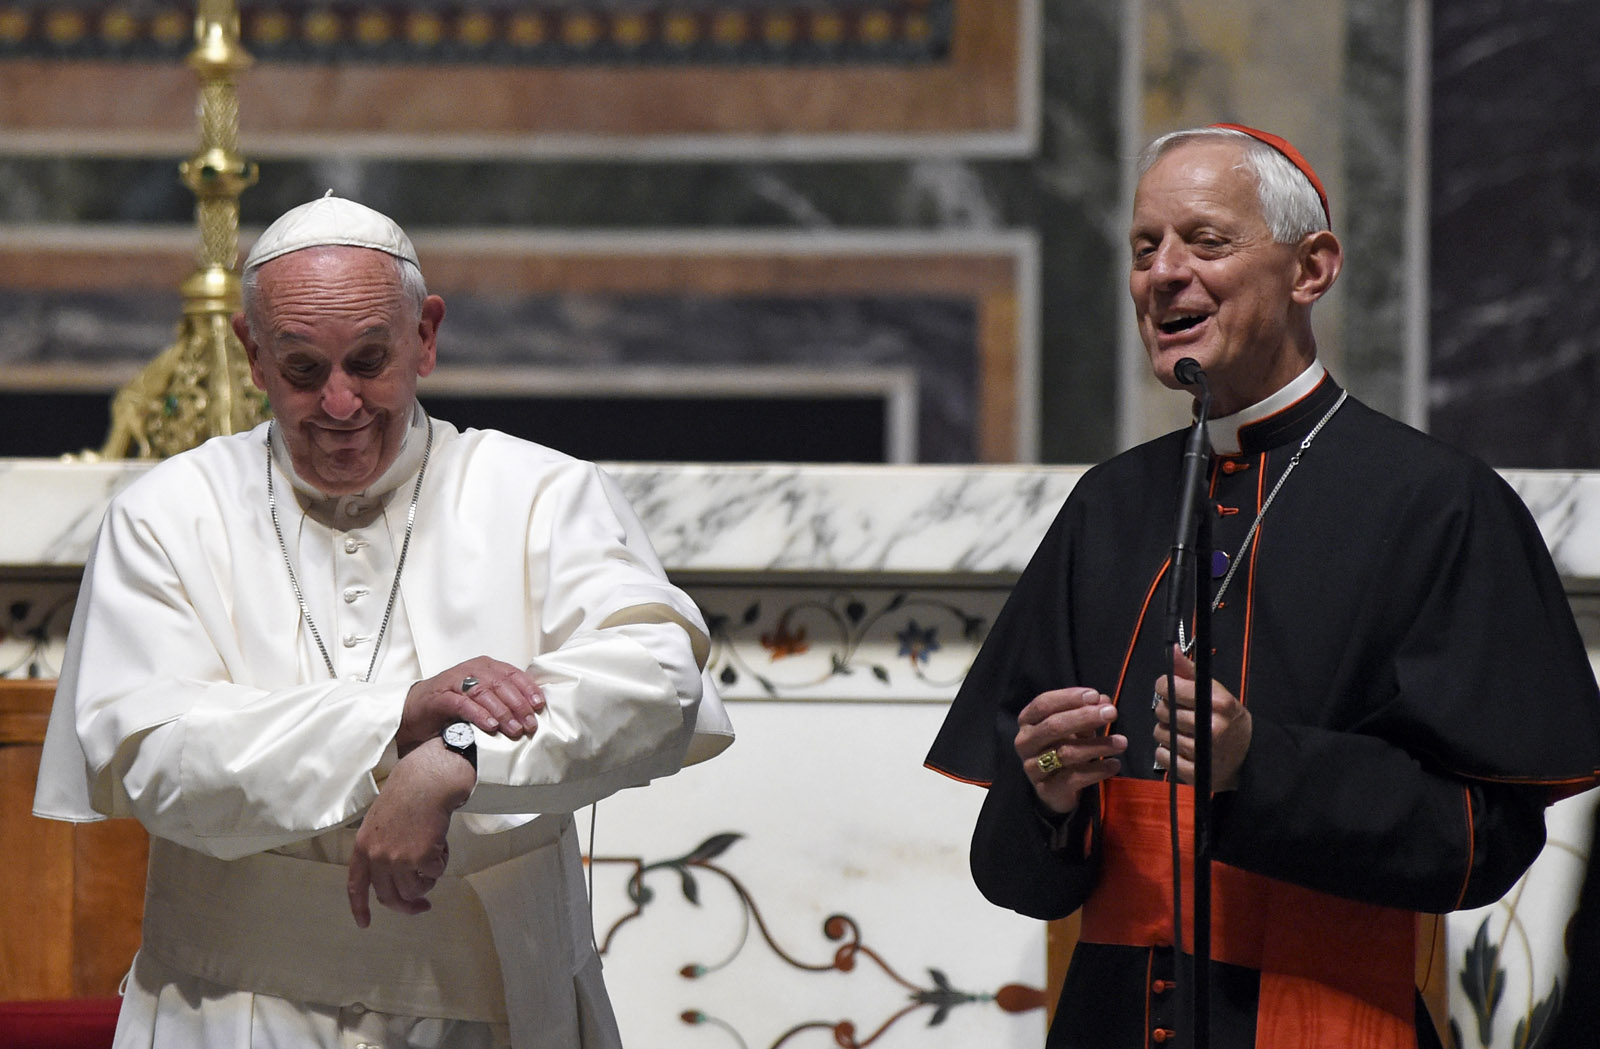 Cardinal Donald Wuerl, archbishop of Washington, right, translates for Pope Francis as the Pope wishes he had more time to greet everyone following the midday prayer from the Liturgy of Hours, the daily form of prayer of the Catholic Church, with bishops from the U.S., Wednesday, Sept. 23, 2015, at the Cathedral of St. Matthew the Apostle in Washington. (AP Photo/Susan Walsh)